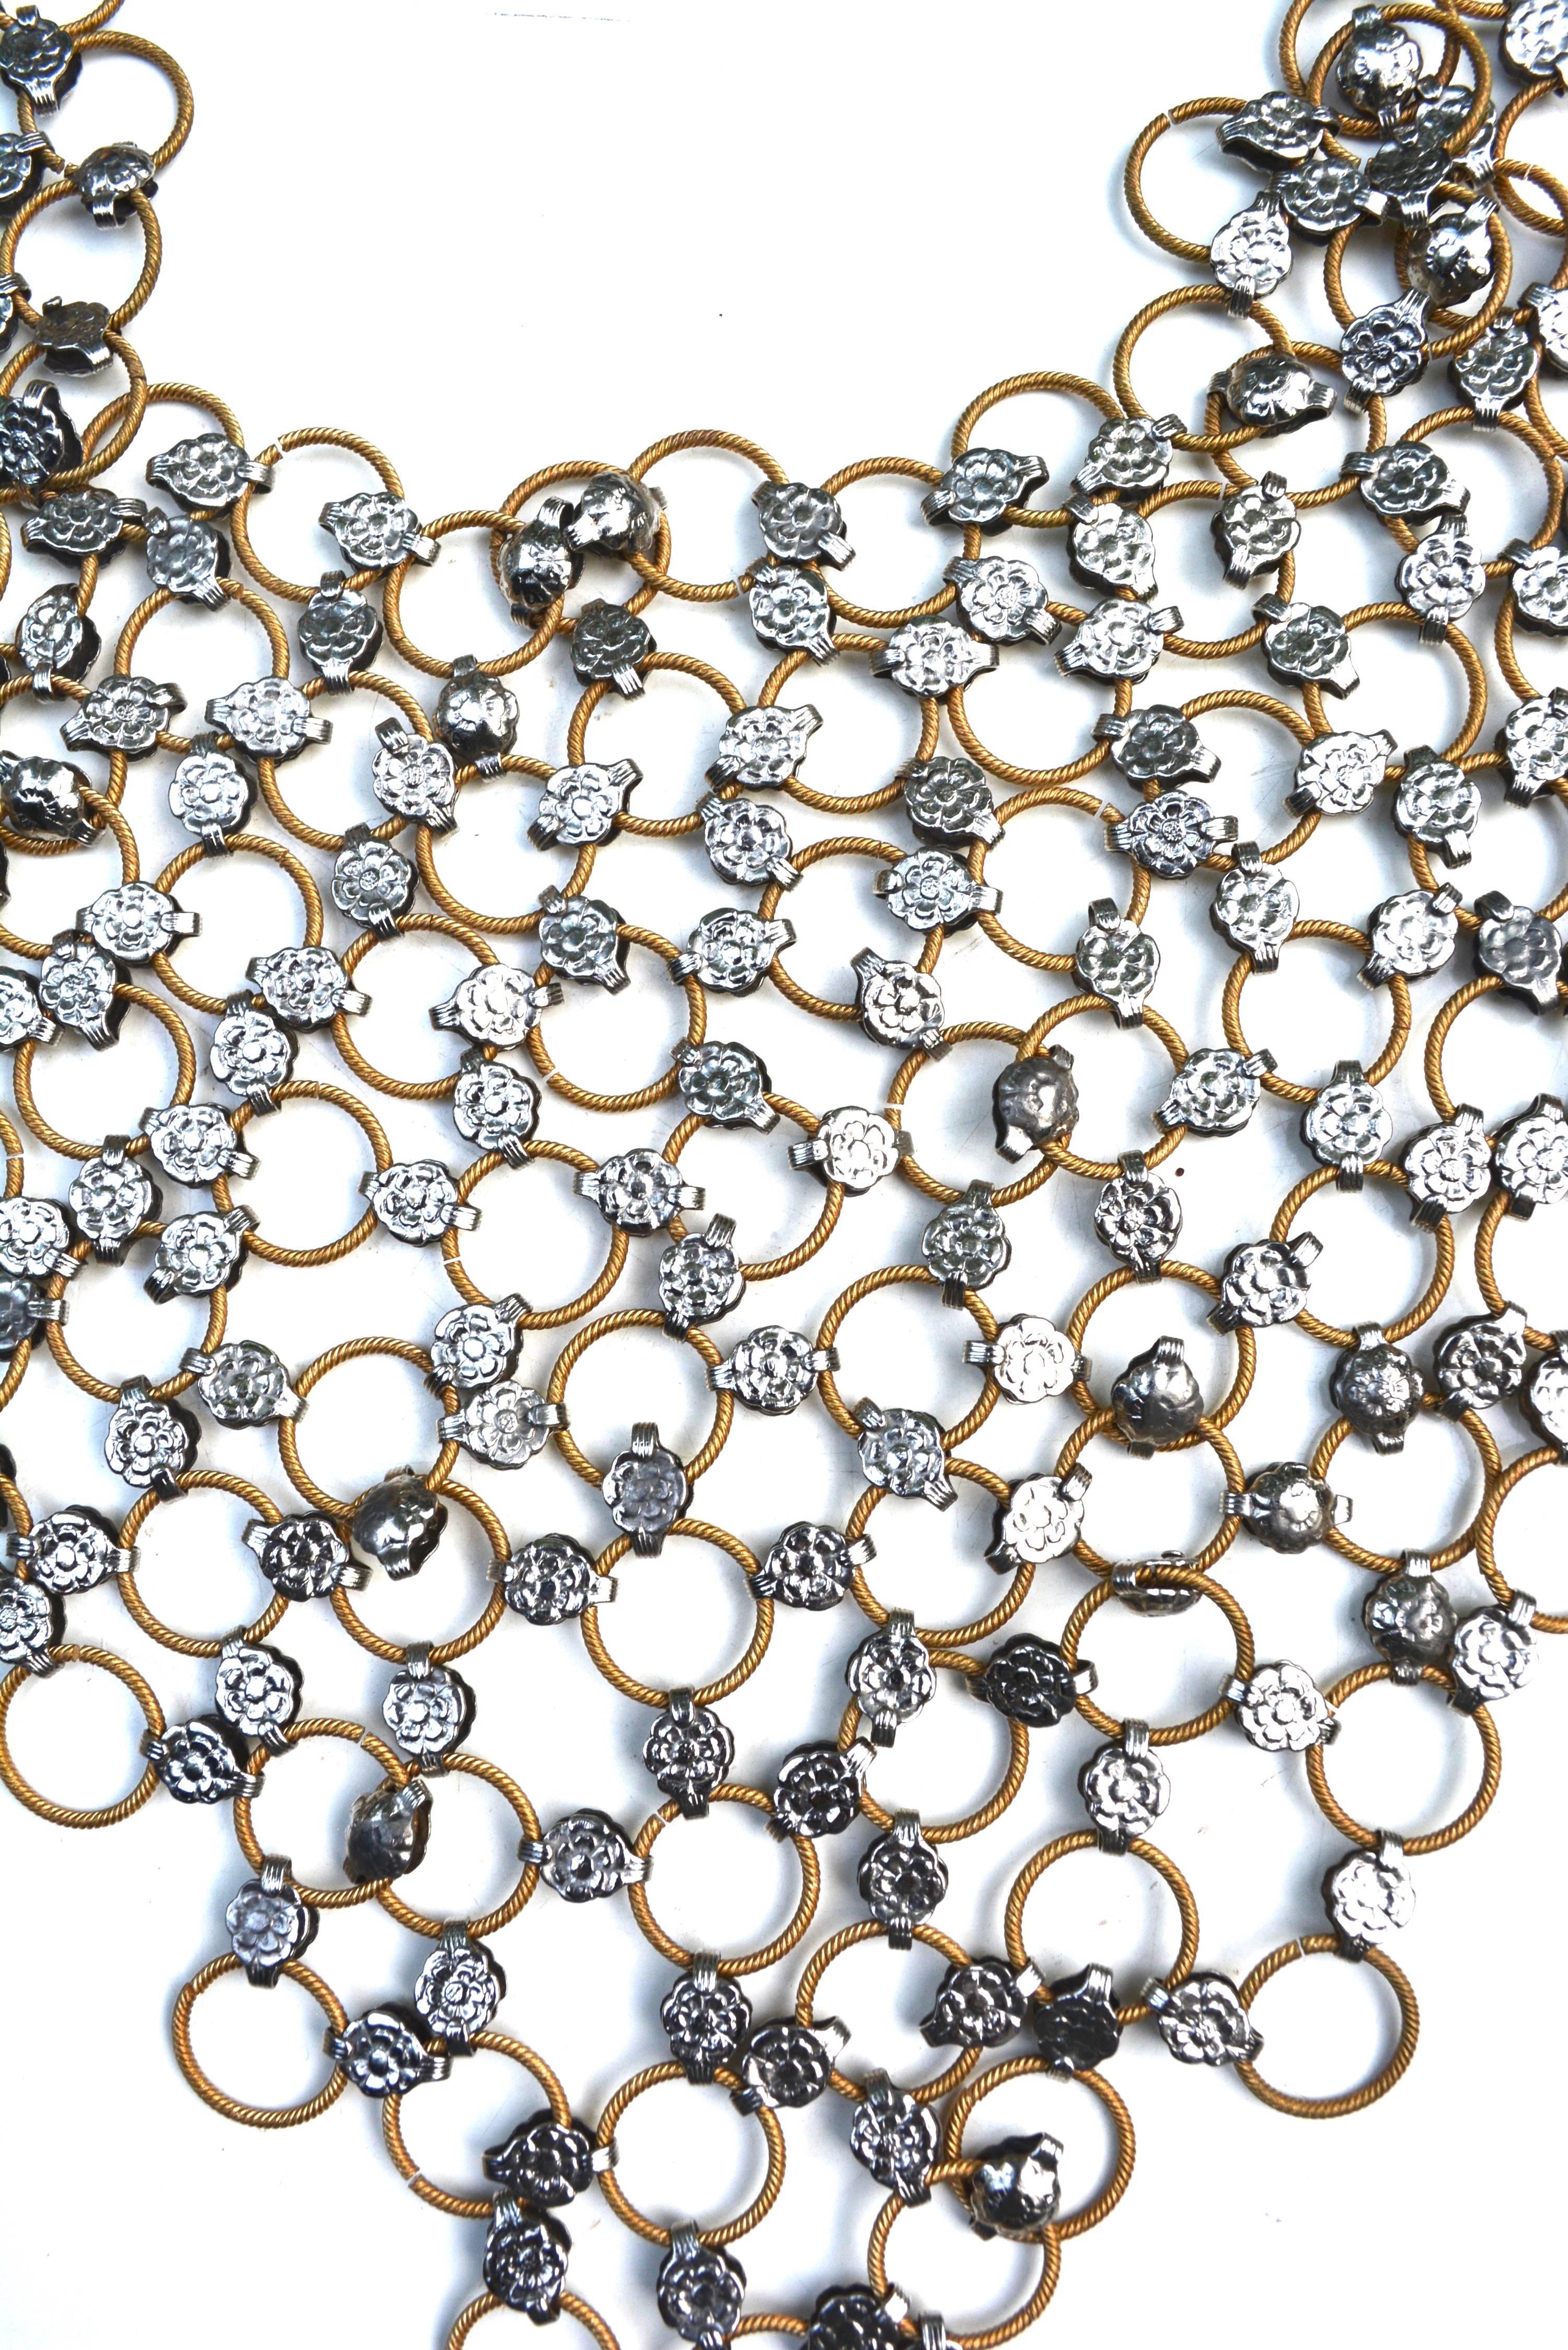 Unique 1960s multi tone chain mail or armor style 18" adjustable by 9" long necklace and matching long earrings. A stunner of a set with an edge. It has a movement which is fluid and not static. Paco style in some ways and really captures